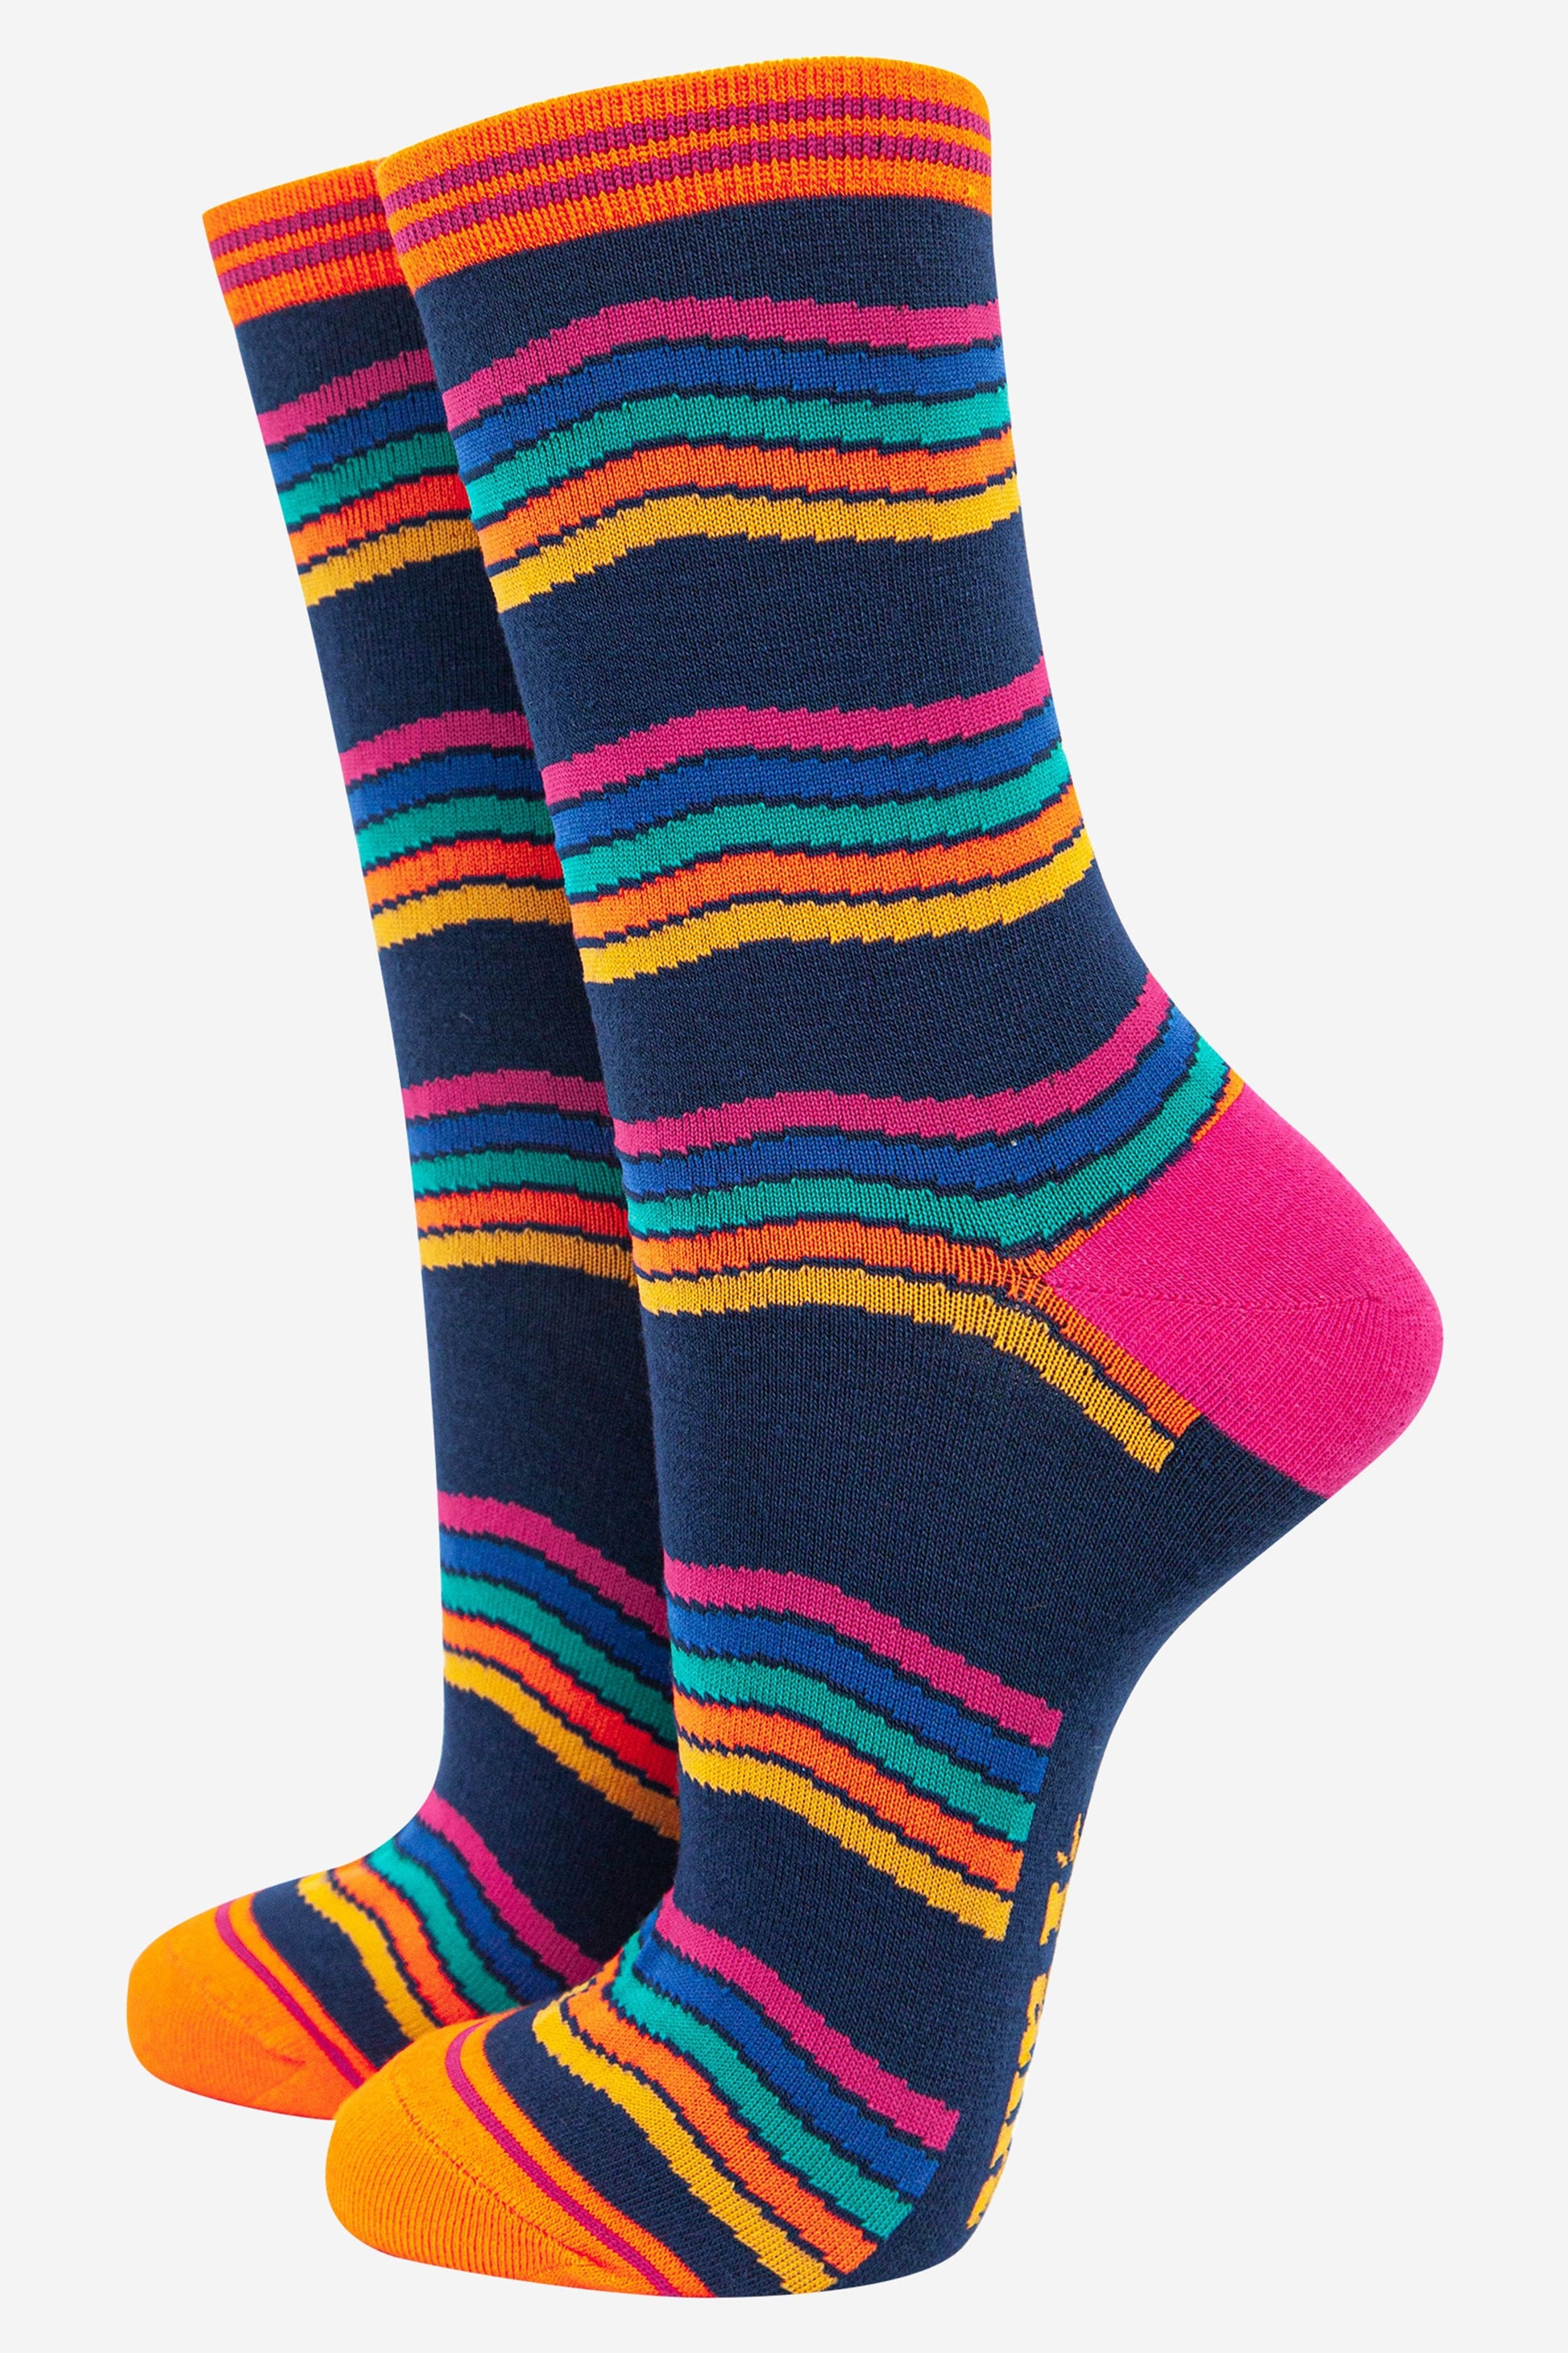 navy blue bamboo socks with a wavy rainbow stripe pattern in pink, blue, orange and yellow